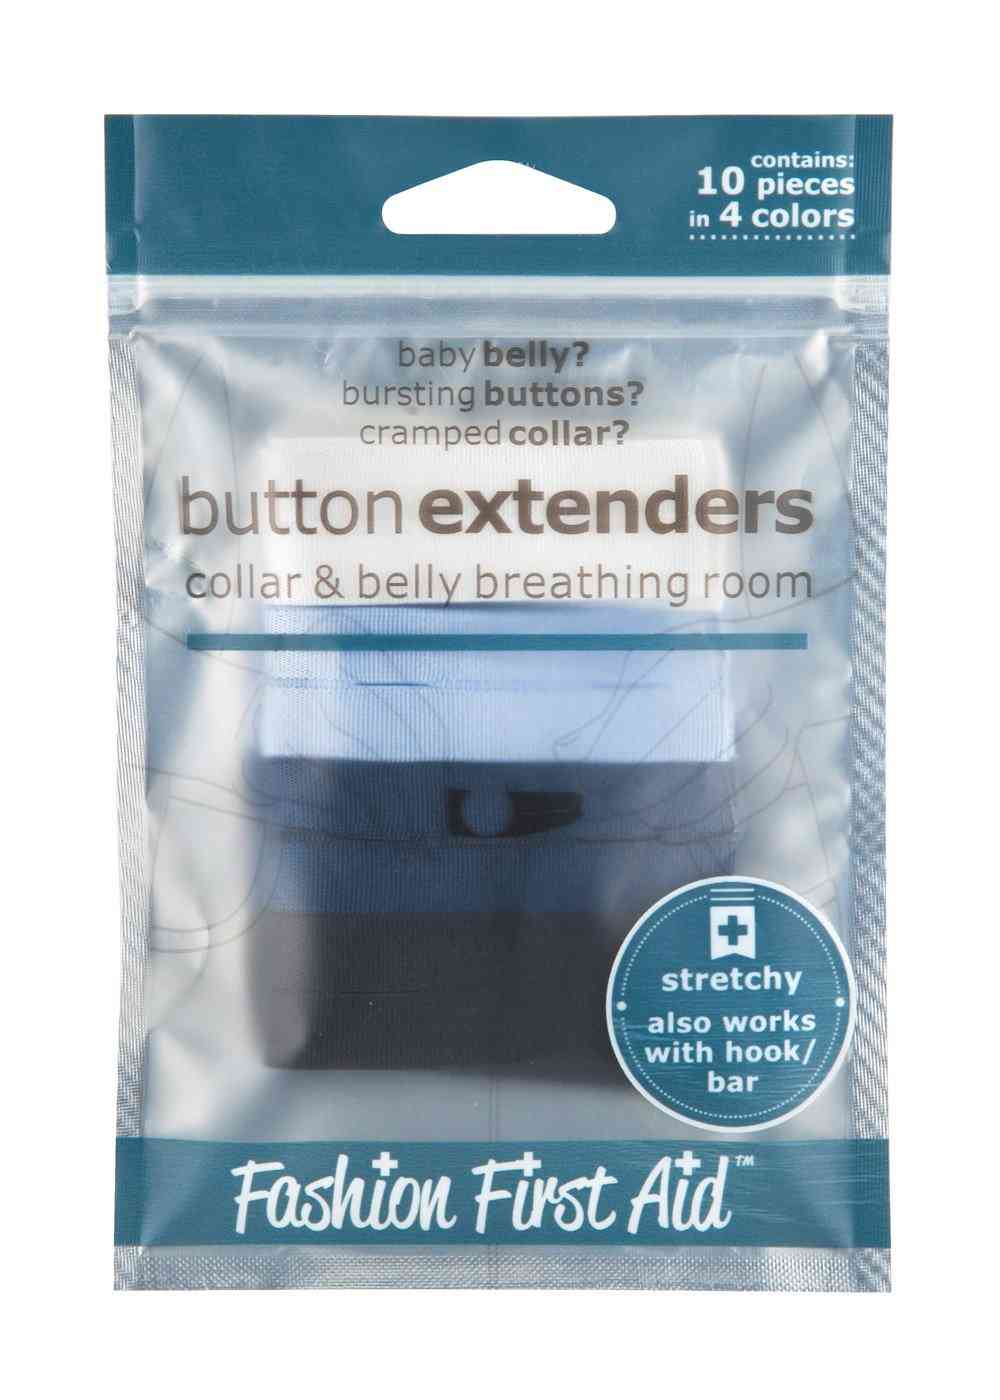 Button Extenders Collar & Belly Breathing Room